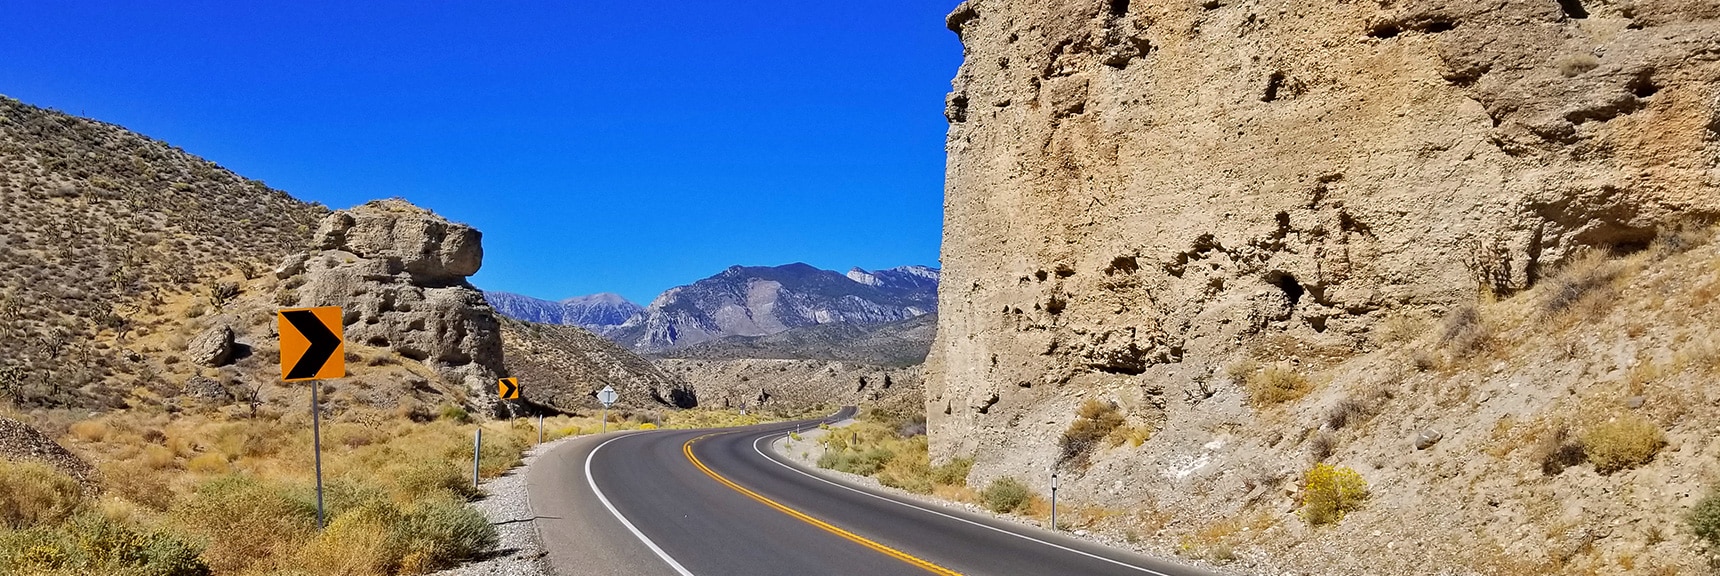 Grand Pillars on Kyle Canyon Road Opening to the Spring Mountains | Harris Springs Canyon | Biking from Centennial Hills | Spring Mountains, Nevada